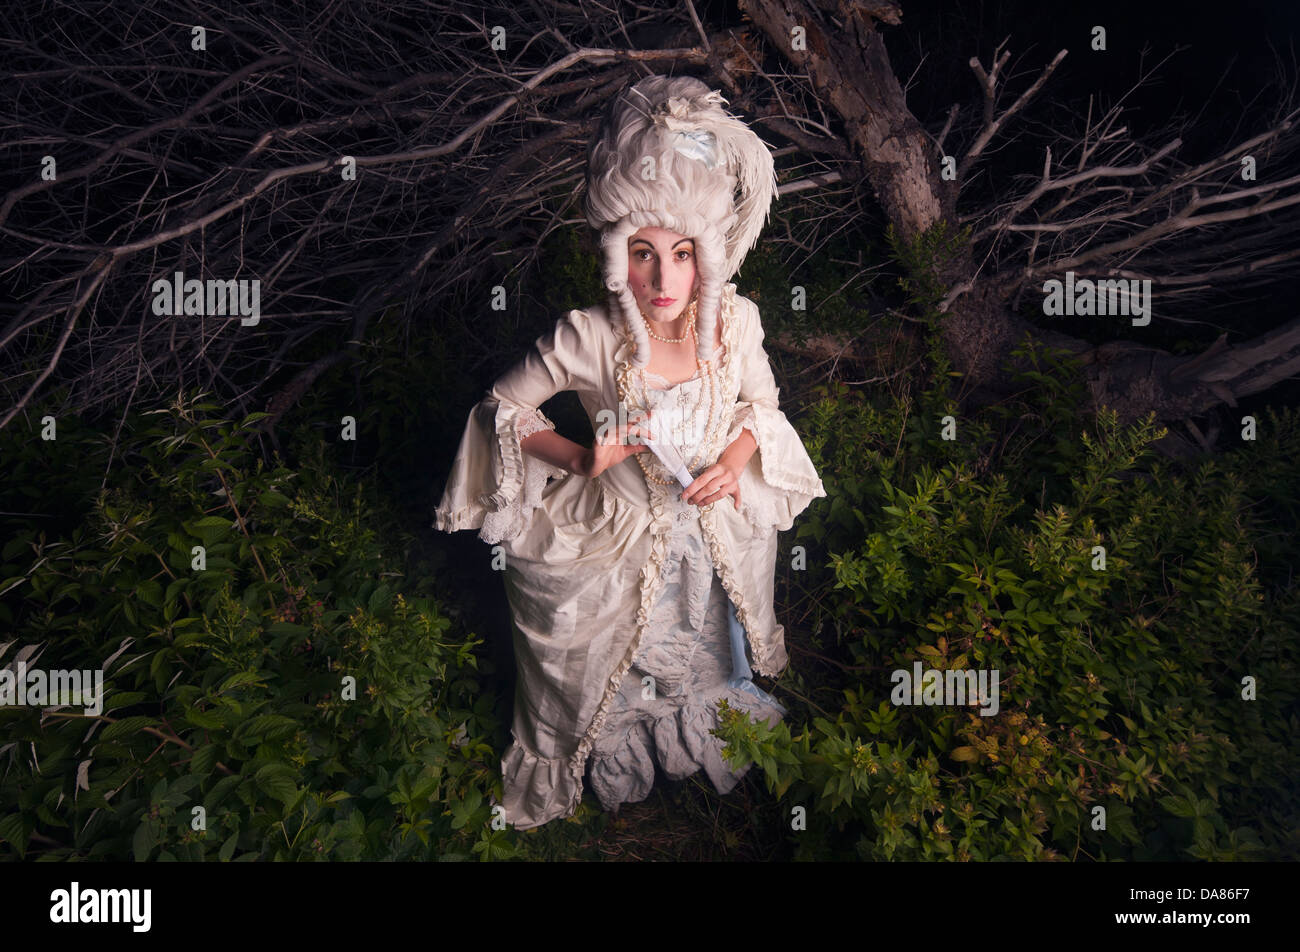 A model dressed as Marie Antoinette poses in Halifax, Nova Scotia, Canada, July 31, 2012. (Adrien Veczan) Stock Photo